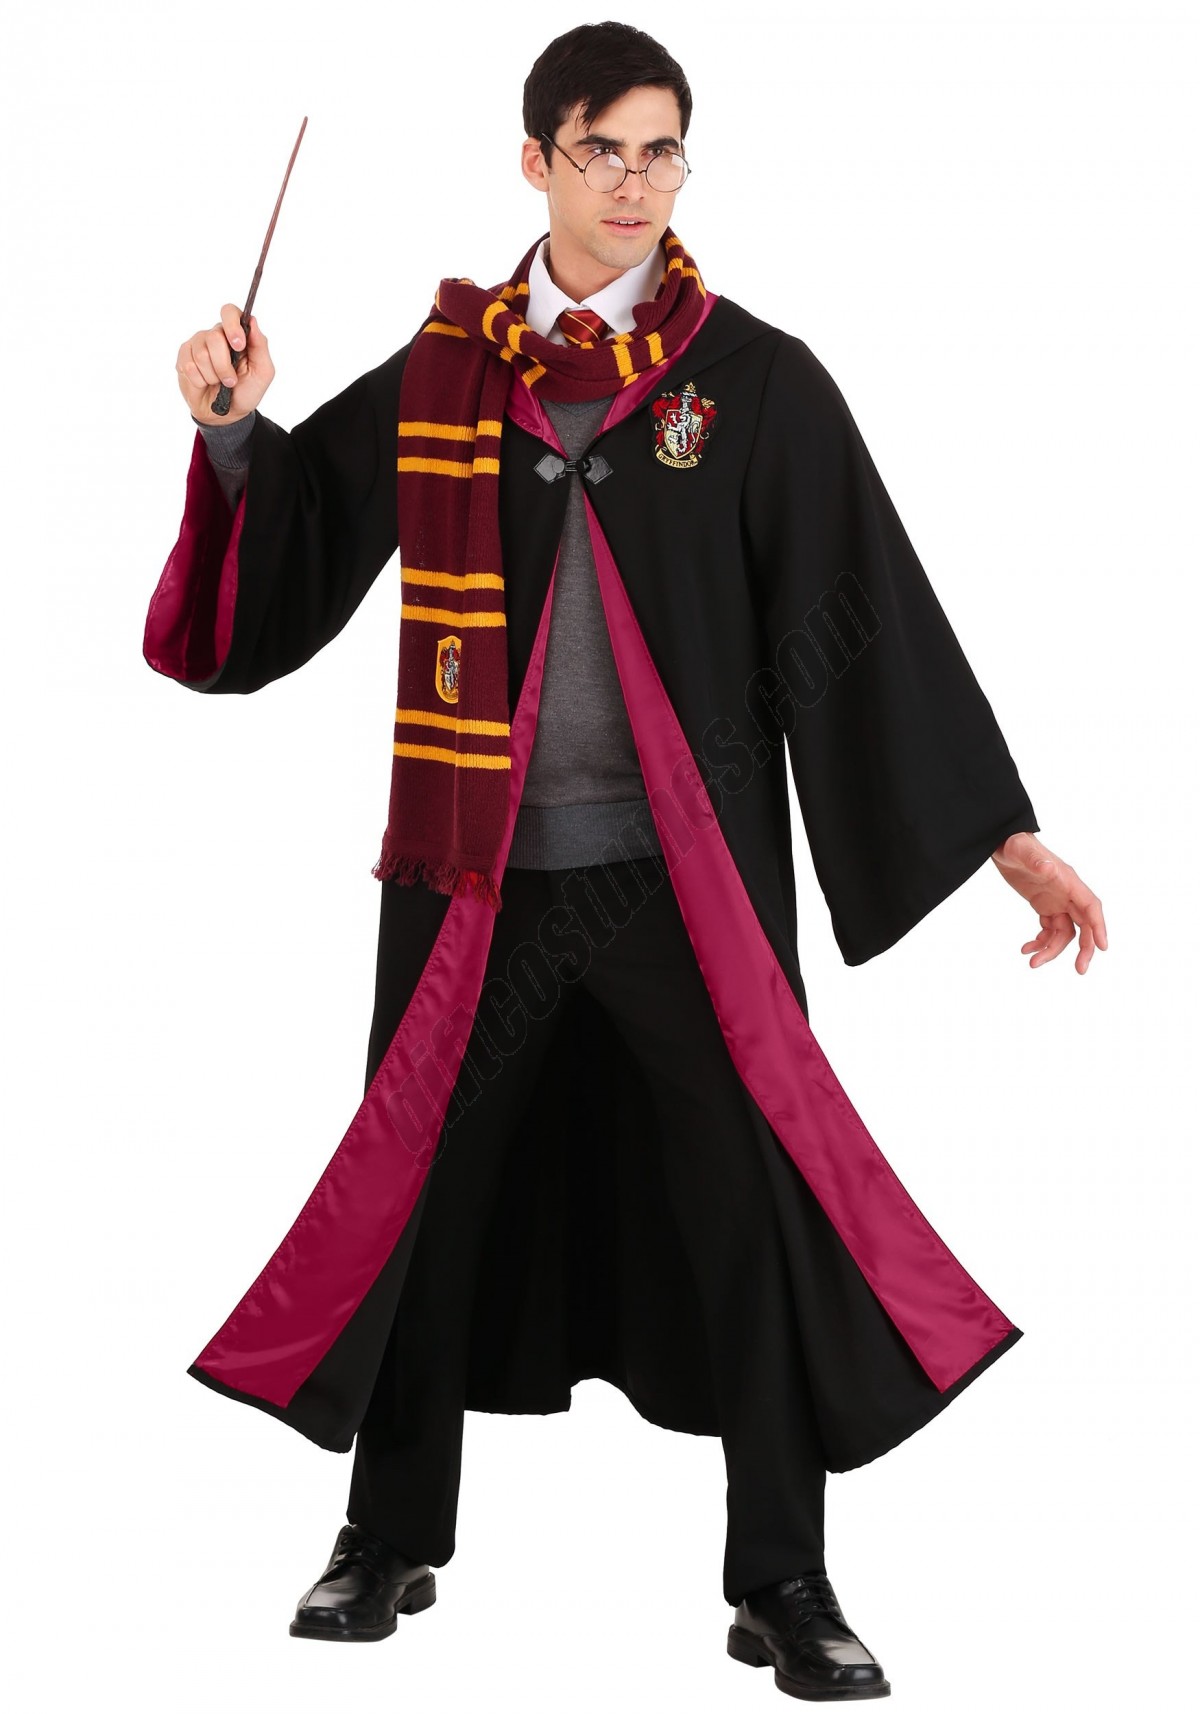 Deluxe Harry Potter Costume for Adults Promotions - -0